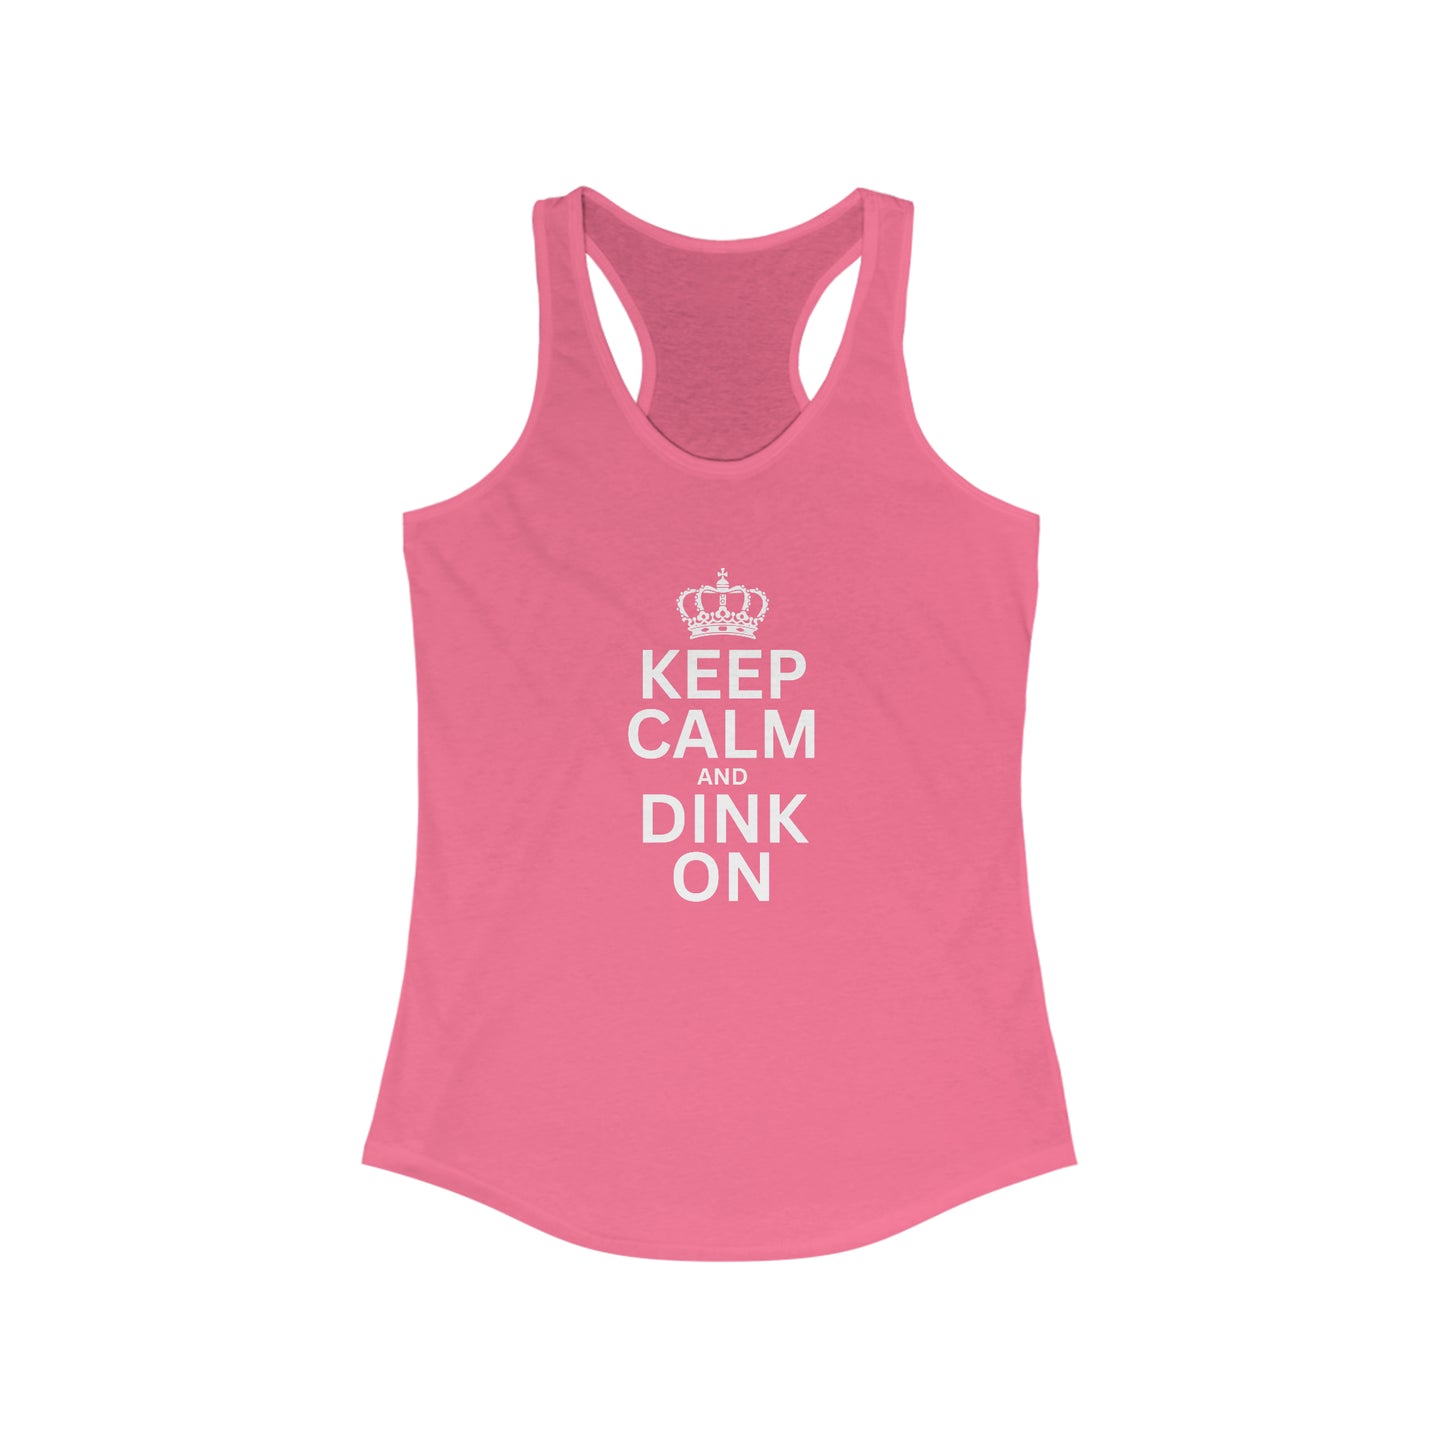 Keep Calm and Dink On Racerback